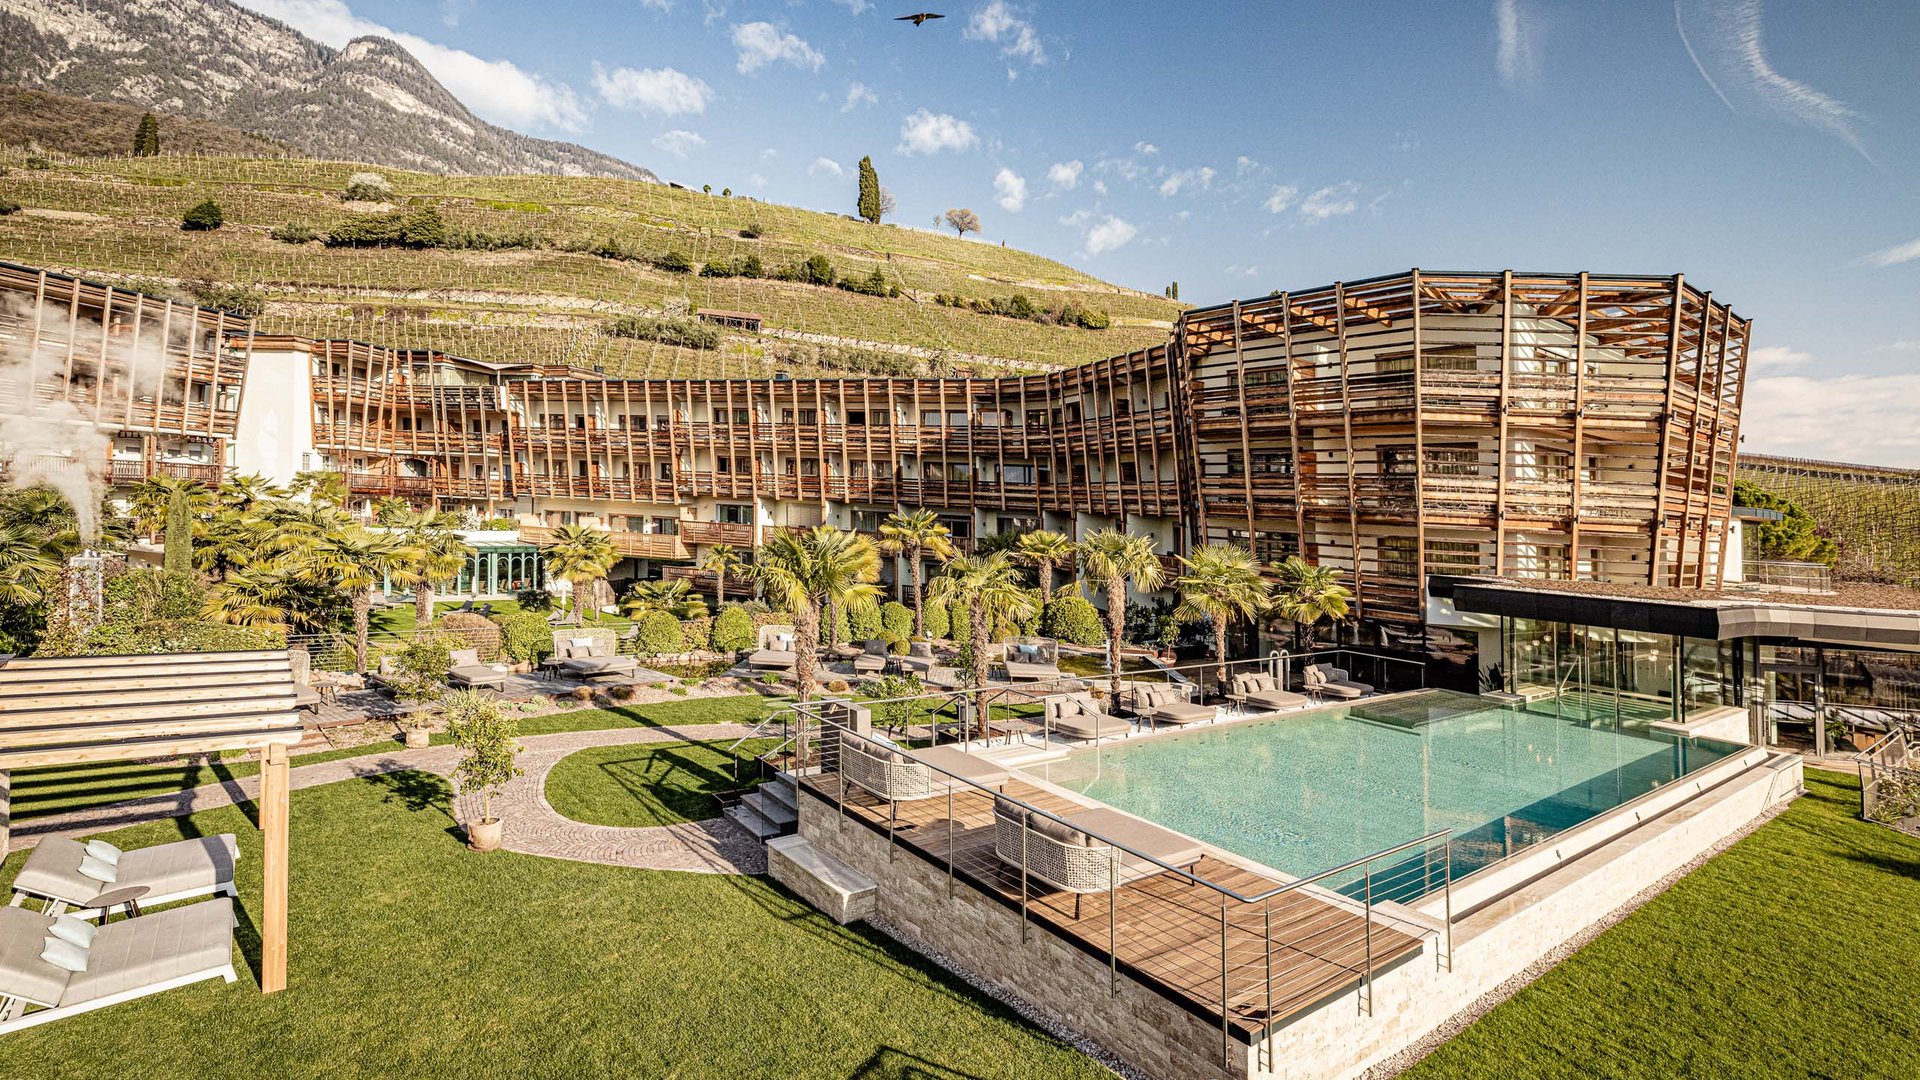 SEELEITEN: your hotel for wellness in South Tyrol